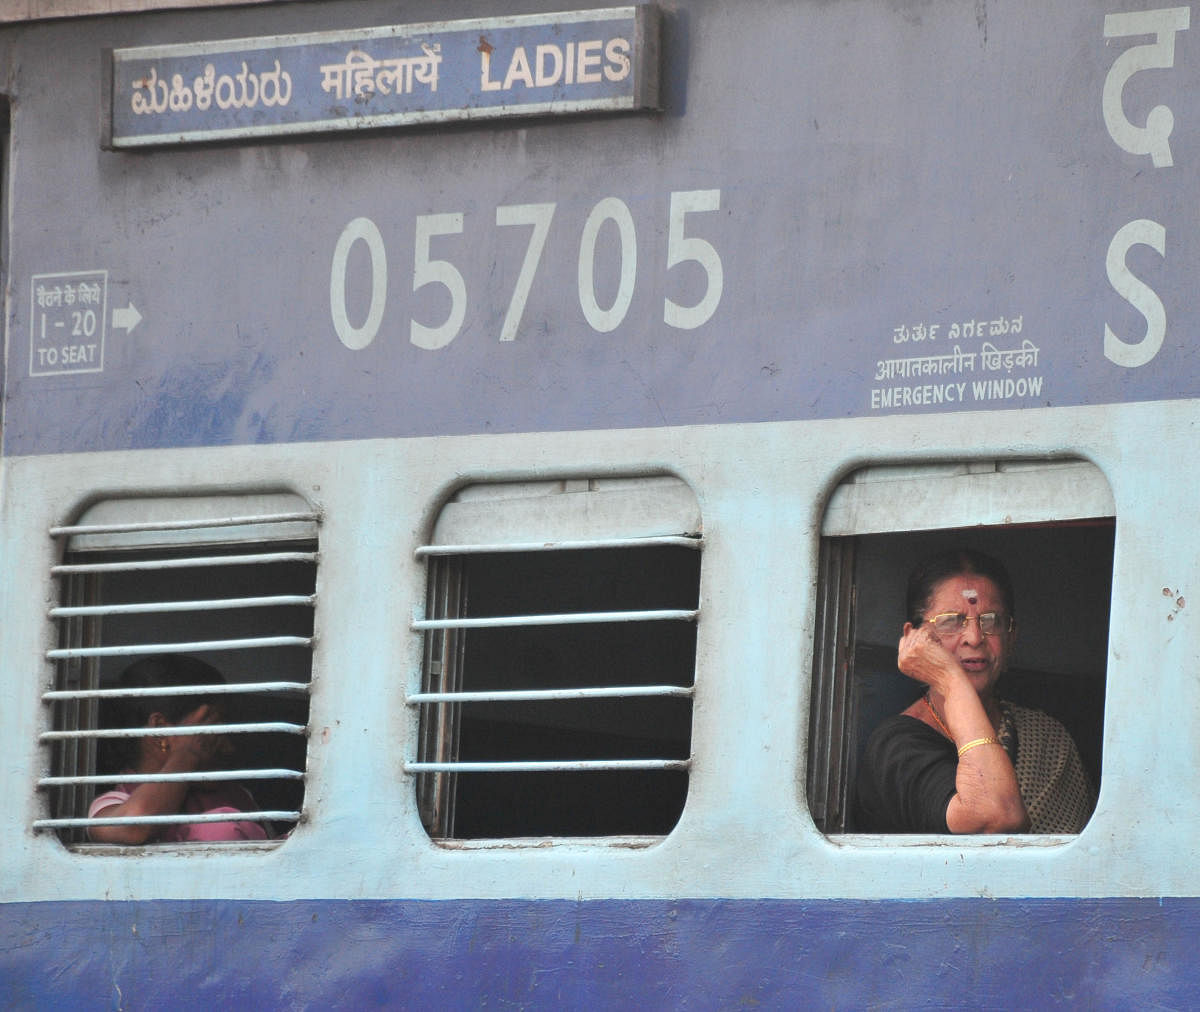 Rlys to place ladies coaches in centre, paint with new colour